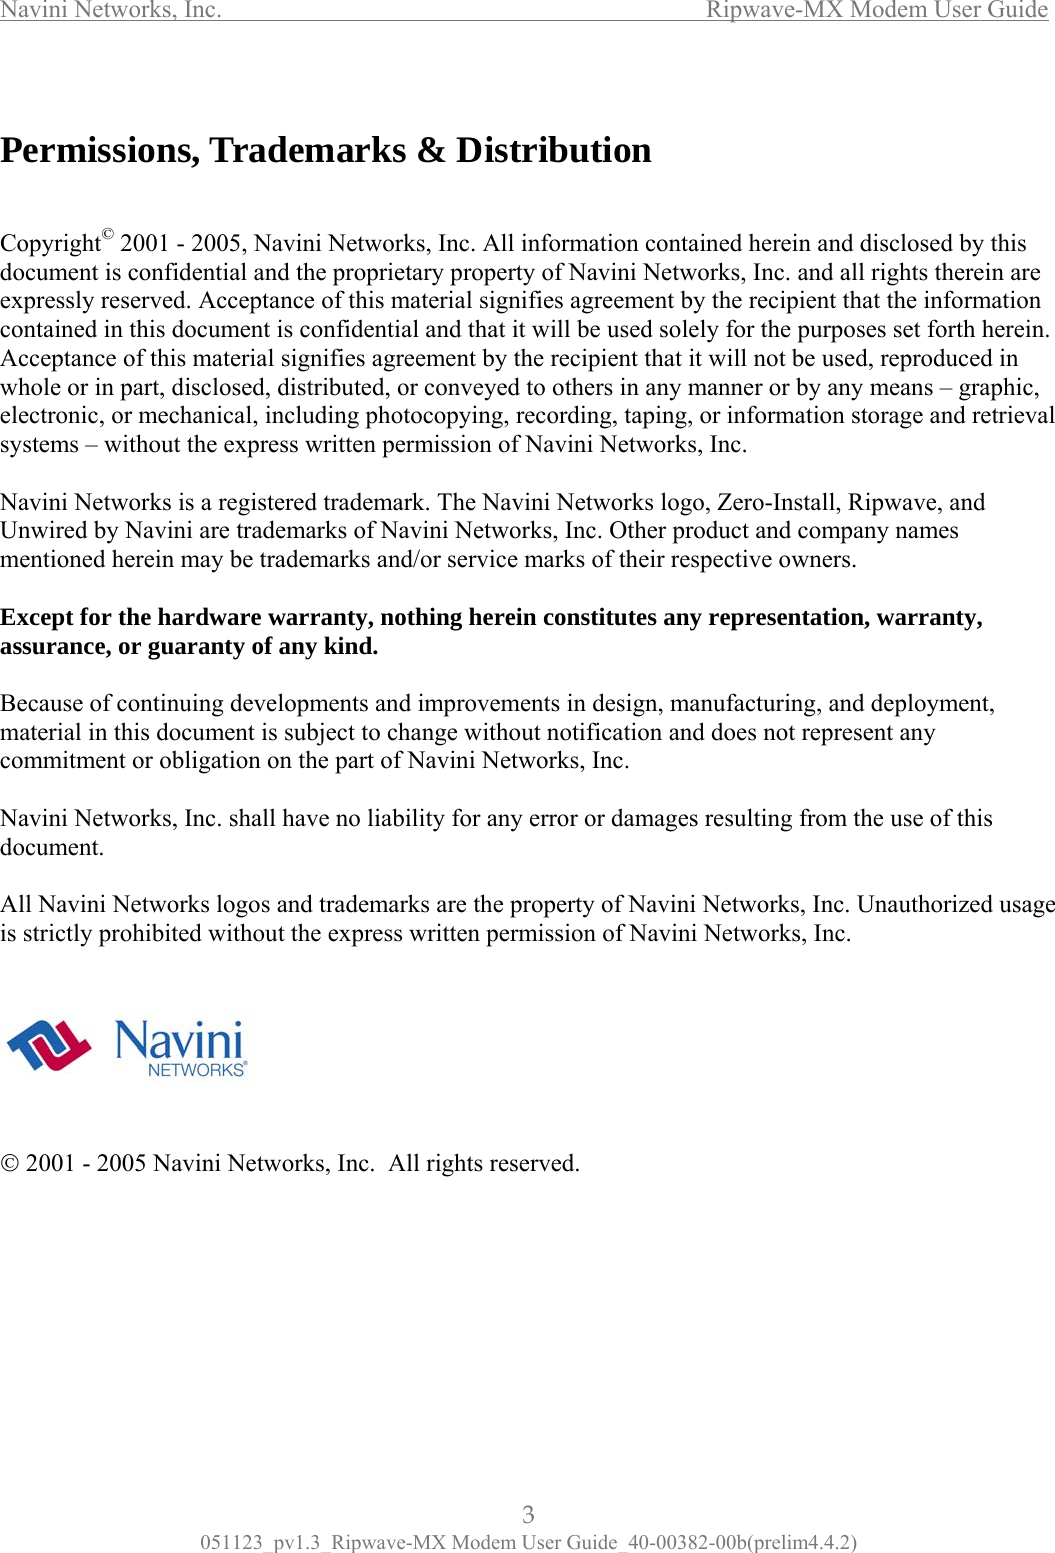 Navini Networks, Inc.                  Ripwave-MX Modem User Guide  Permissions, Trademarks &amp; Distribution   Because of continuing developmmis         Copyright© 2001 - 2005, Navini Networks, Inc. All information contained herein and disclosed by this document is confidential and the proprietary property of Navini Networks, Inc. and all rights therein are expressly reserved. Acceptance of this material signifies agreement by the recipient that the information contained in this document is confidential and that it will be used solely for the purposes set forth herein. Acceptance of this material signifies agreement by the recipient that it will not be used, reproduced in whole or in part, disclosed, distributed, or conveyed to others in any manner or by any means – graphic, electronic, or mechanical, including photocopying, recording, taping, or information storage and retrieval systems – without the express written permission of Navini Networks, Inc. Navini Networks is a registered trademark. The Navini Networks logo, Zero-Install, Ripwave, and Unwired by Navini are trademarks of Navini Networks, Inc. Other product and company names mentioned herein may be trademarks and/or service marks of their respective owners.  Except for the hardware warranty, nothing herein constitutes any representation, warranty, assurance, or guaranty of any kind.  ents and improvements in design, manufacturing, and deployment, aterial in this document is subject to change without notification and does not represent any commitment or obligation on the part of Navini Networks, Inc.  Navini Networks, Inc. shall have no liability for any error or damages resulting from the use of this document.  All Navini Networks logos and trademarks are the property of Navini Networks, Inc. Unauthorized usage strictly prohibited without the express written permission of Navini Networks, Inc.  © 2001 - 2005 Navini Networks, Inc.  All rights reserved.      3 051123_pv1.3_Ripwave-MX Modem User Guide_40-00382-00b(prelim4.4.2) 